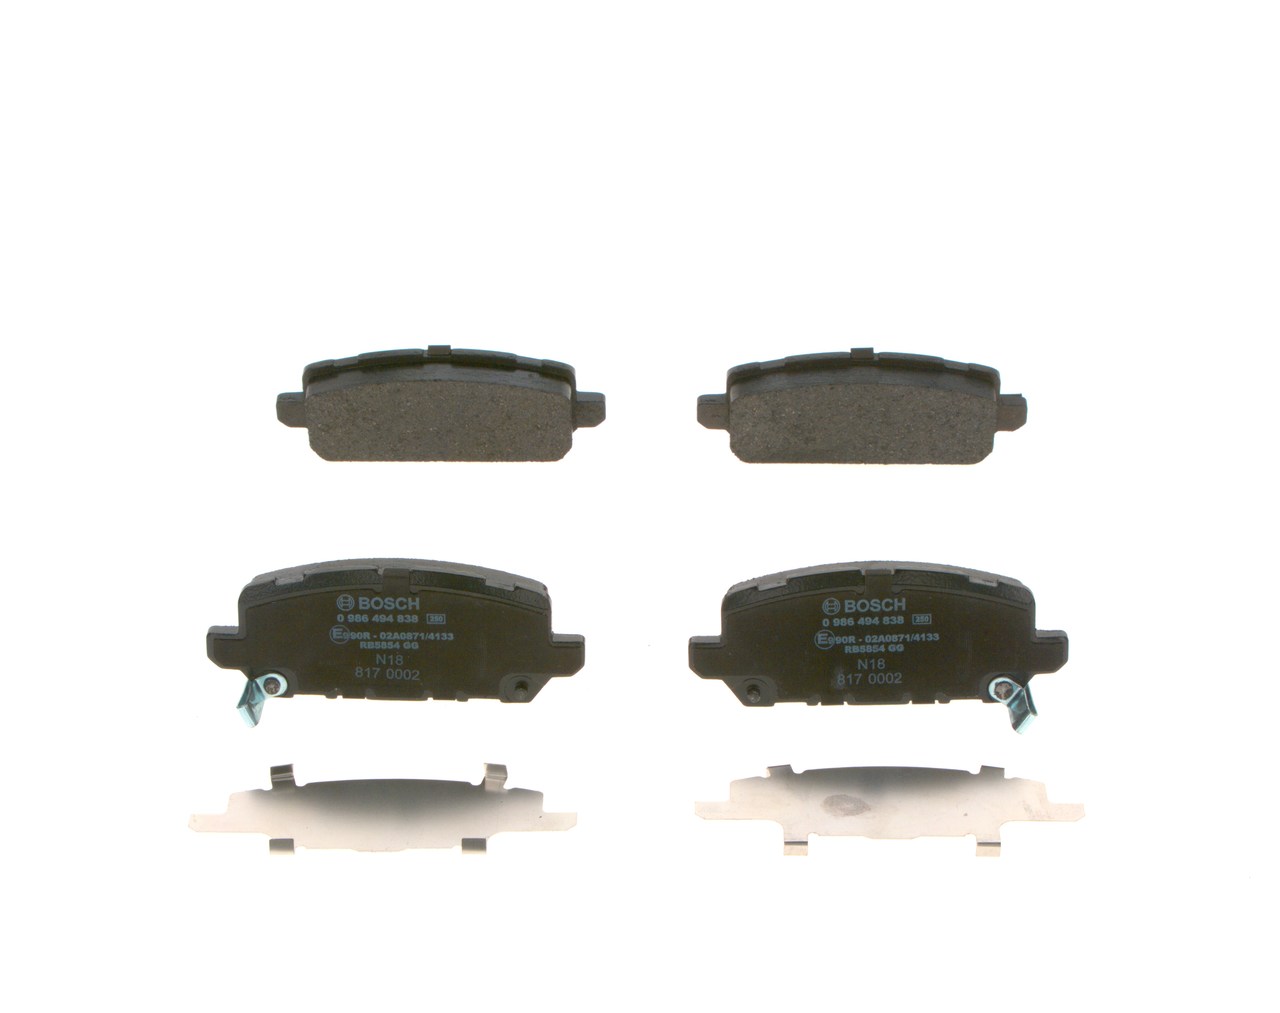 BOSCH 0 986 494 838 Brake pad set Low-Metallic, with integrated wear warning contact, with acoustic wear warning, with anti-squeak plate